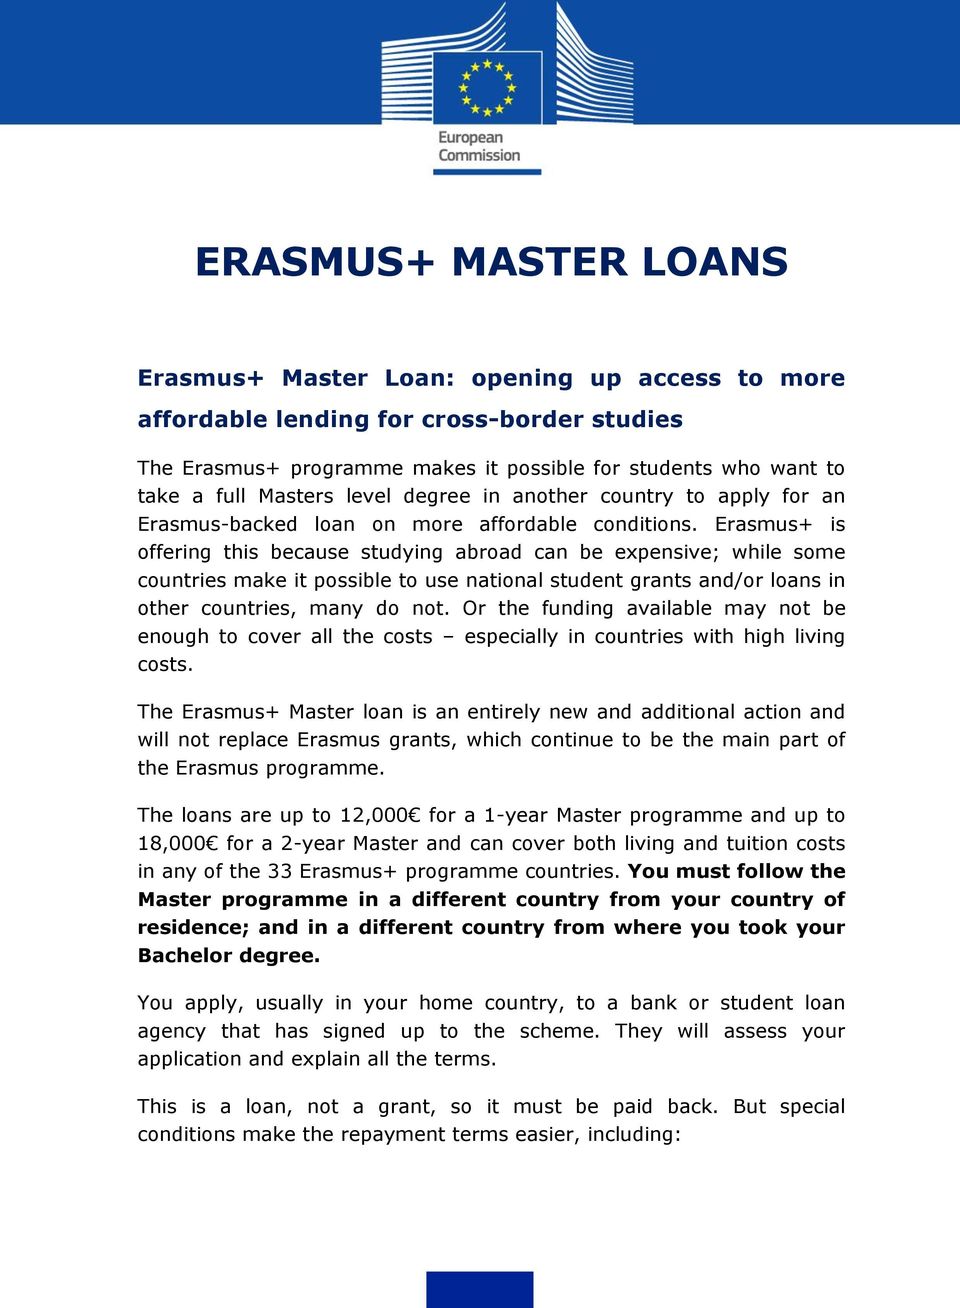 Erasmus+ is offering this because studying abroad can be expensive; while some countries make it possible to use national student grants and/or loans in other countries, many do not.